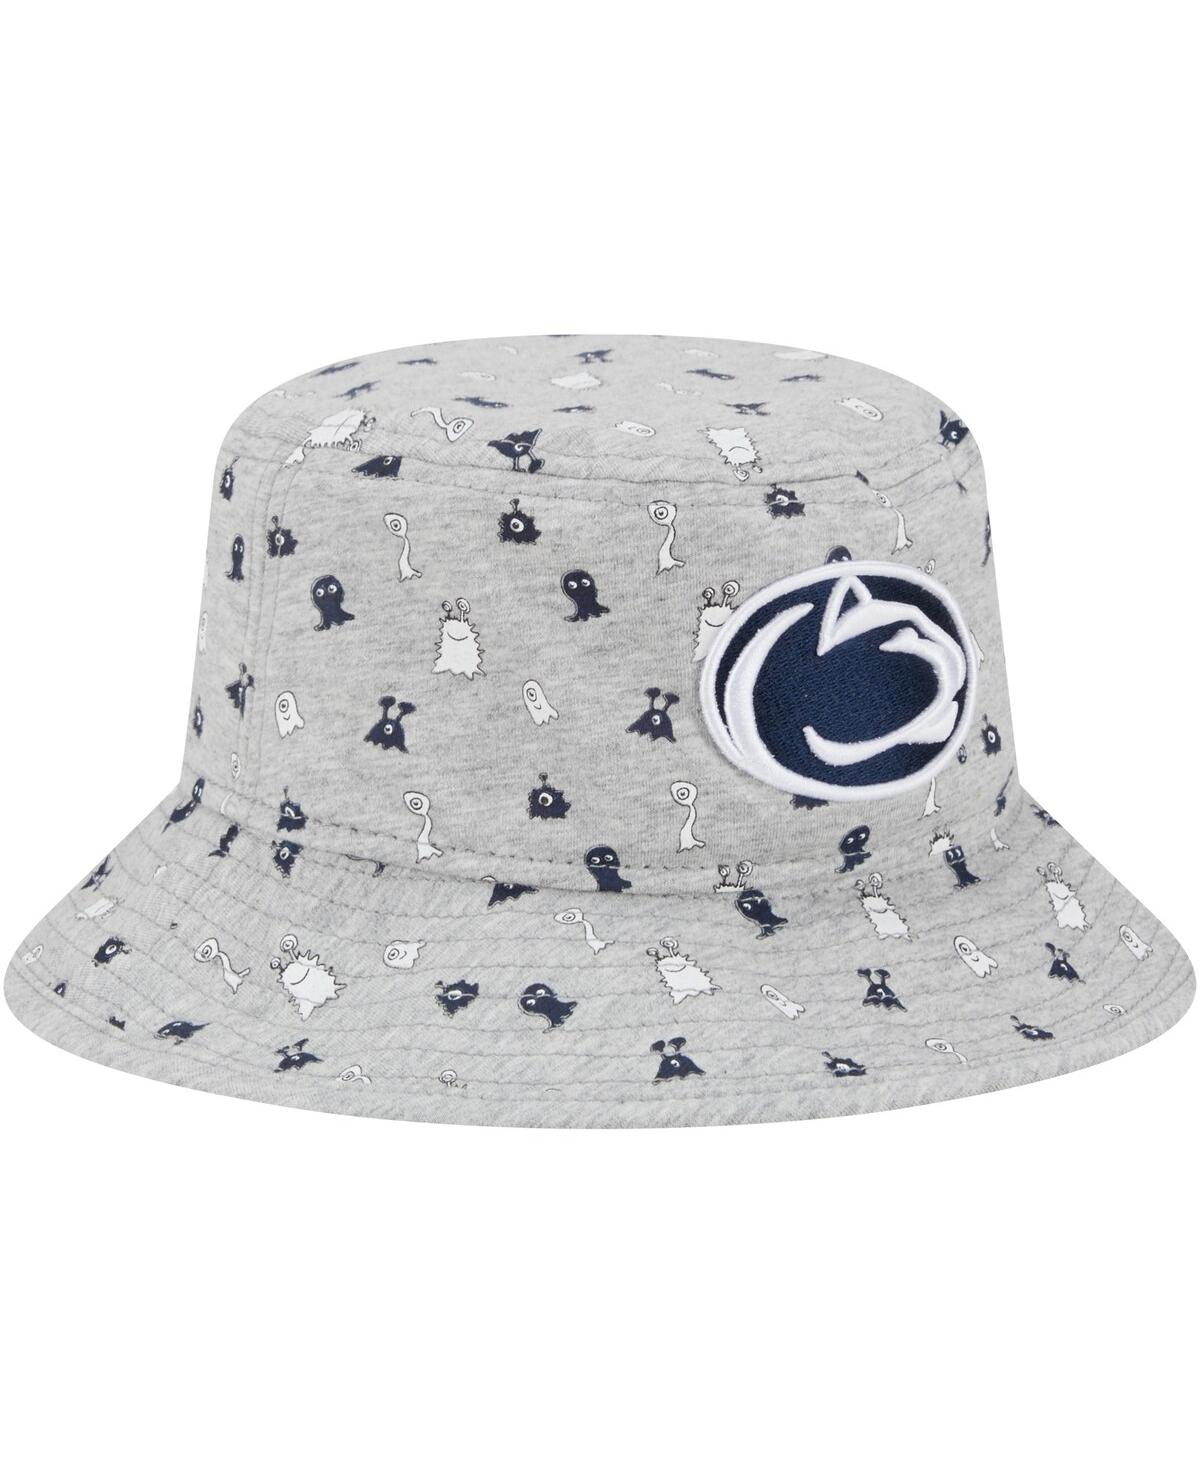 Shop New Era Toddler Boys And Girls  Heather Gray Penn State Nittany Lions Critter Bucket Hat